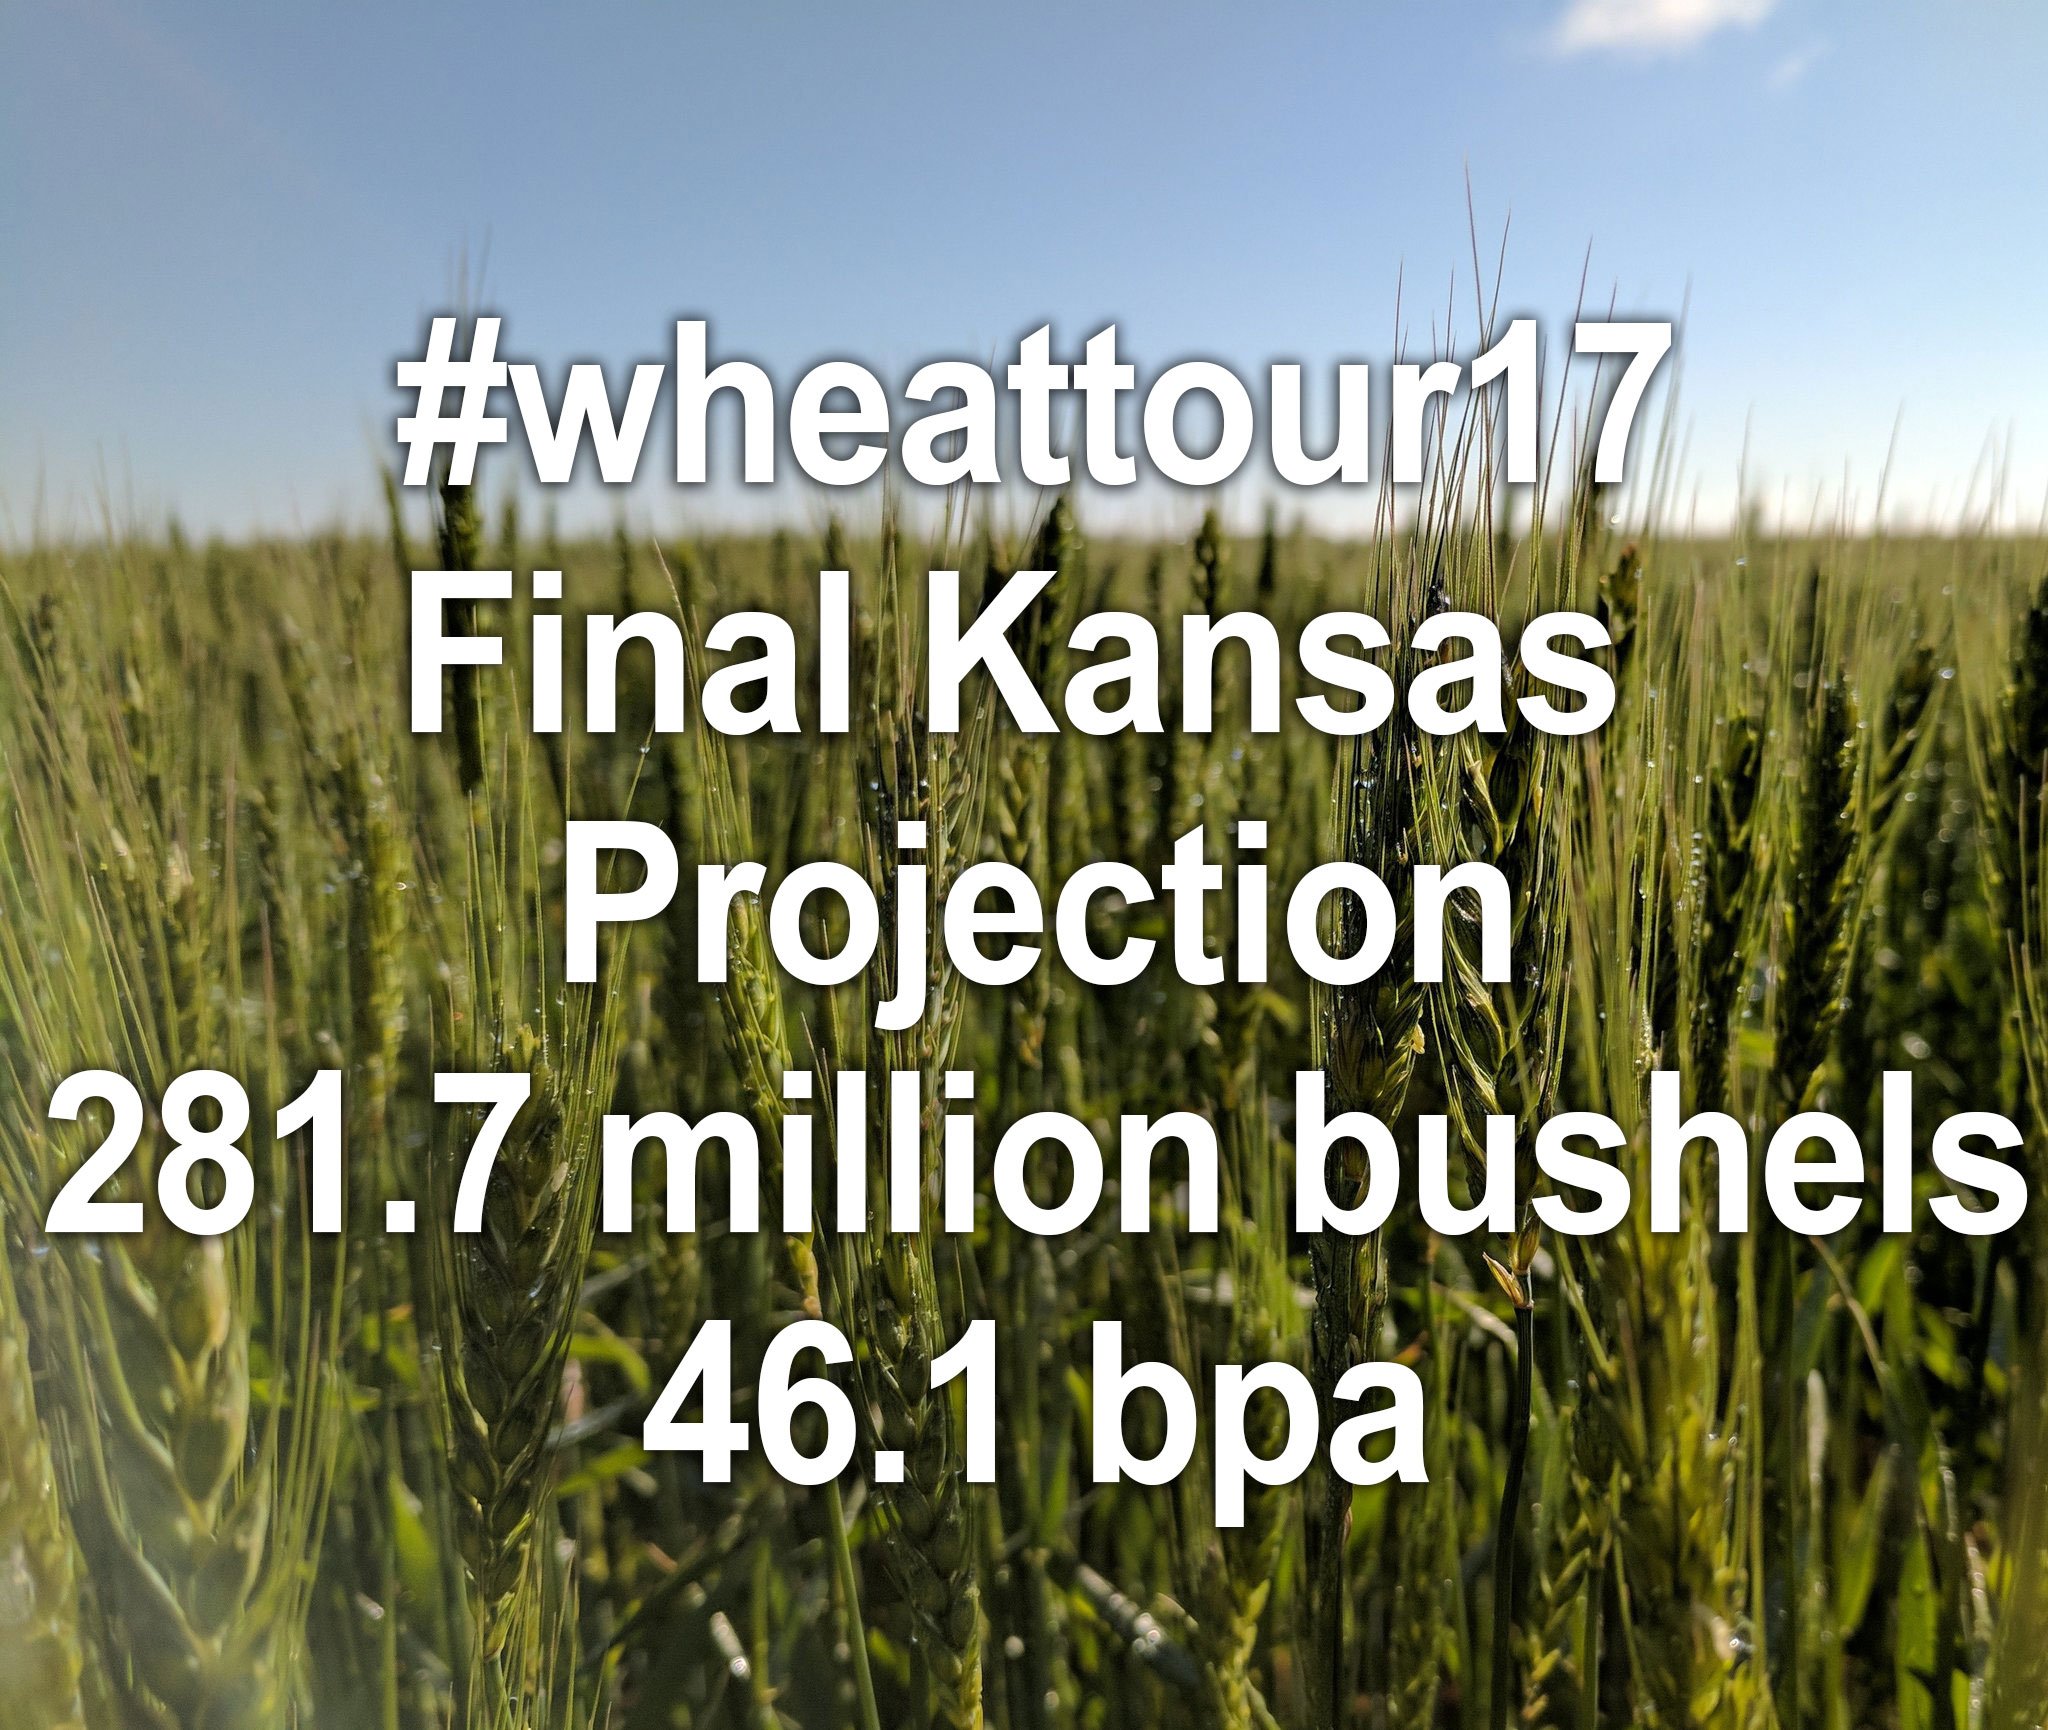 Kansas Wheat Crop Projected at 281 Million Bushels- Down Forty Percent from 2016